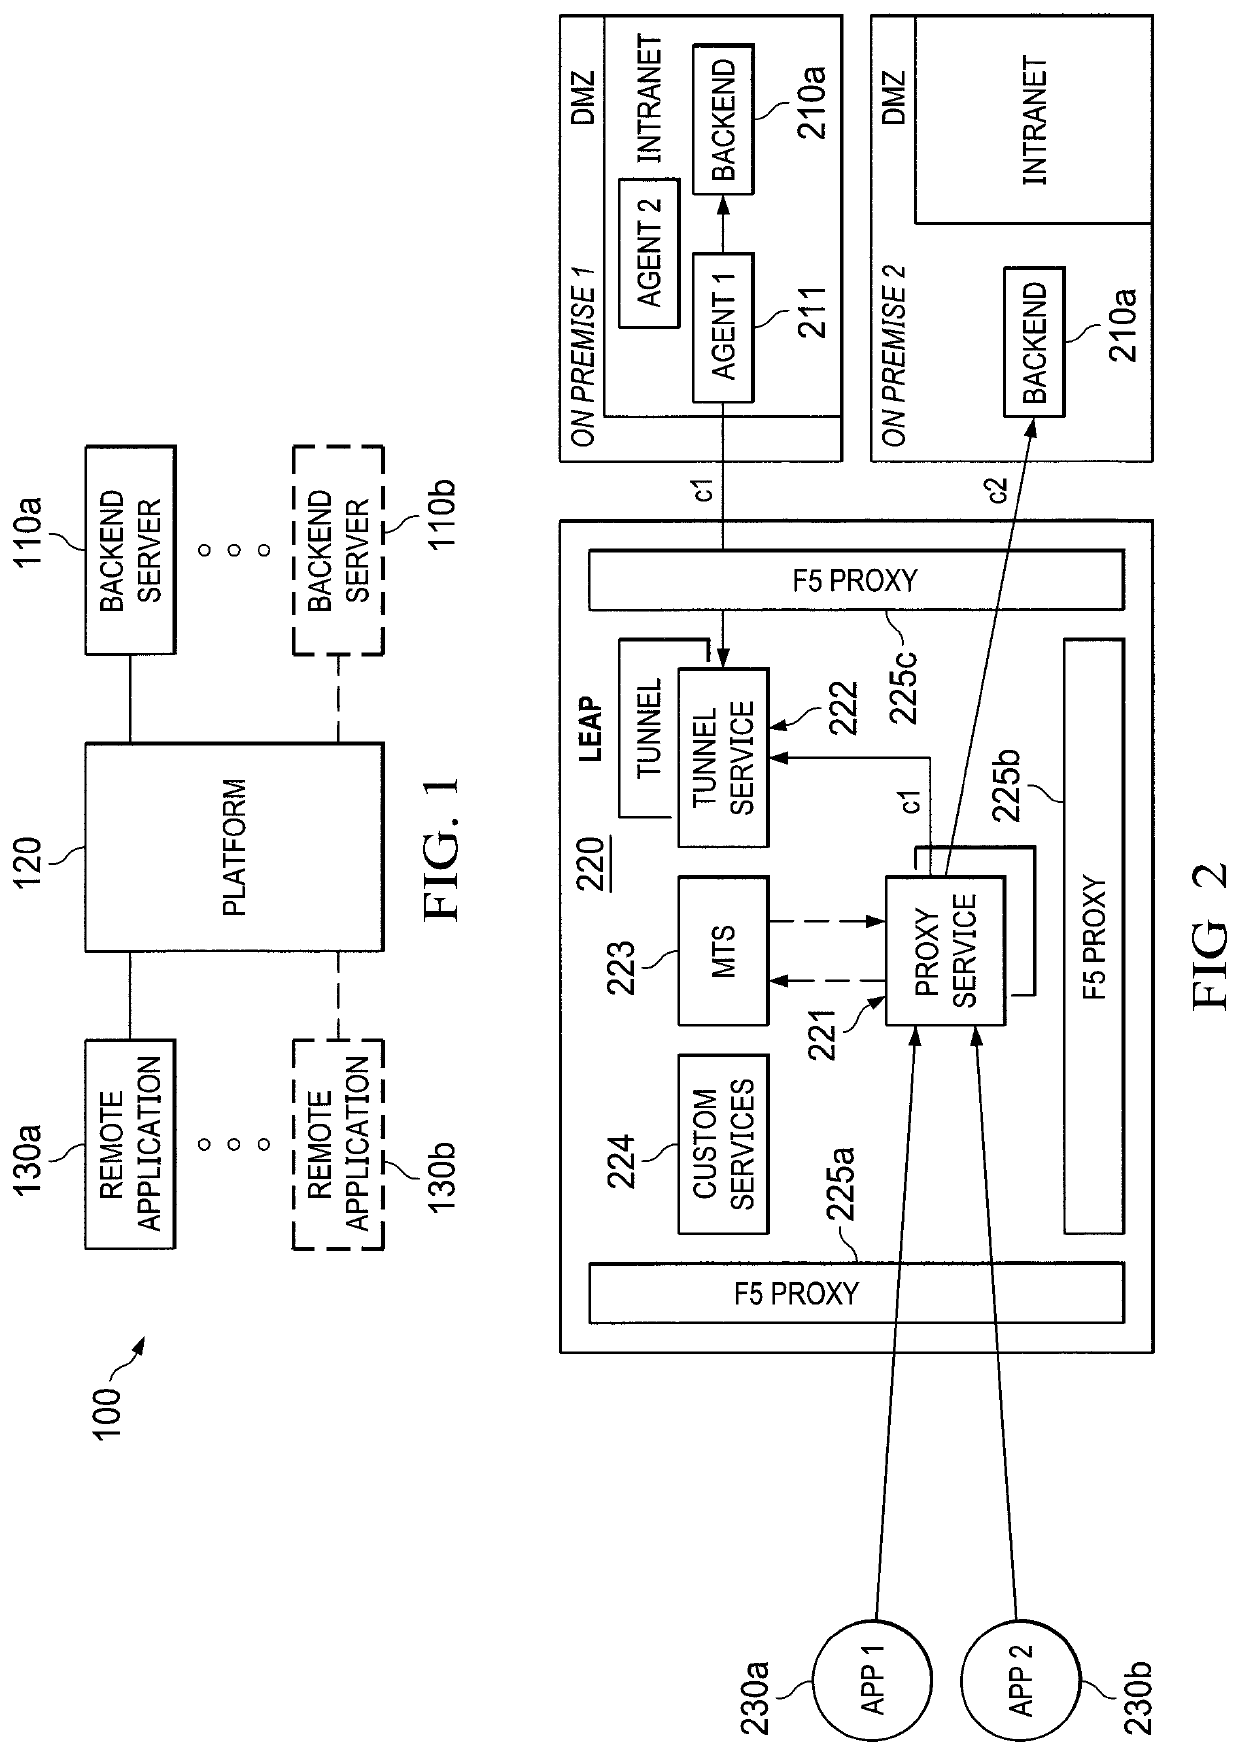 Systems and methods for providing communications between on-premises servers and remote devices